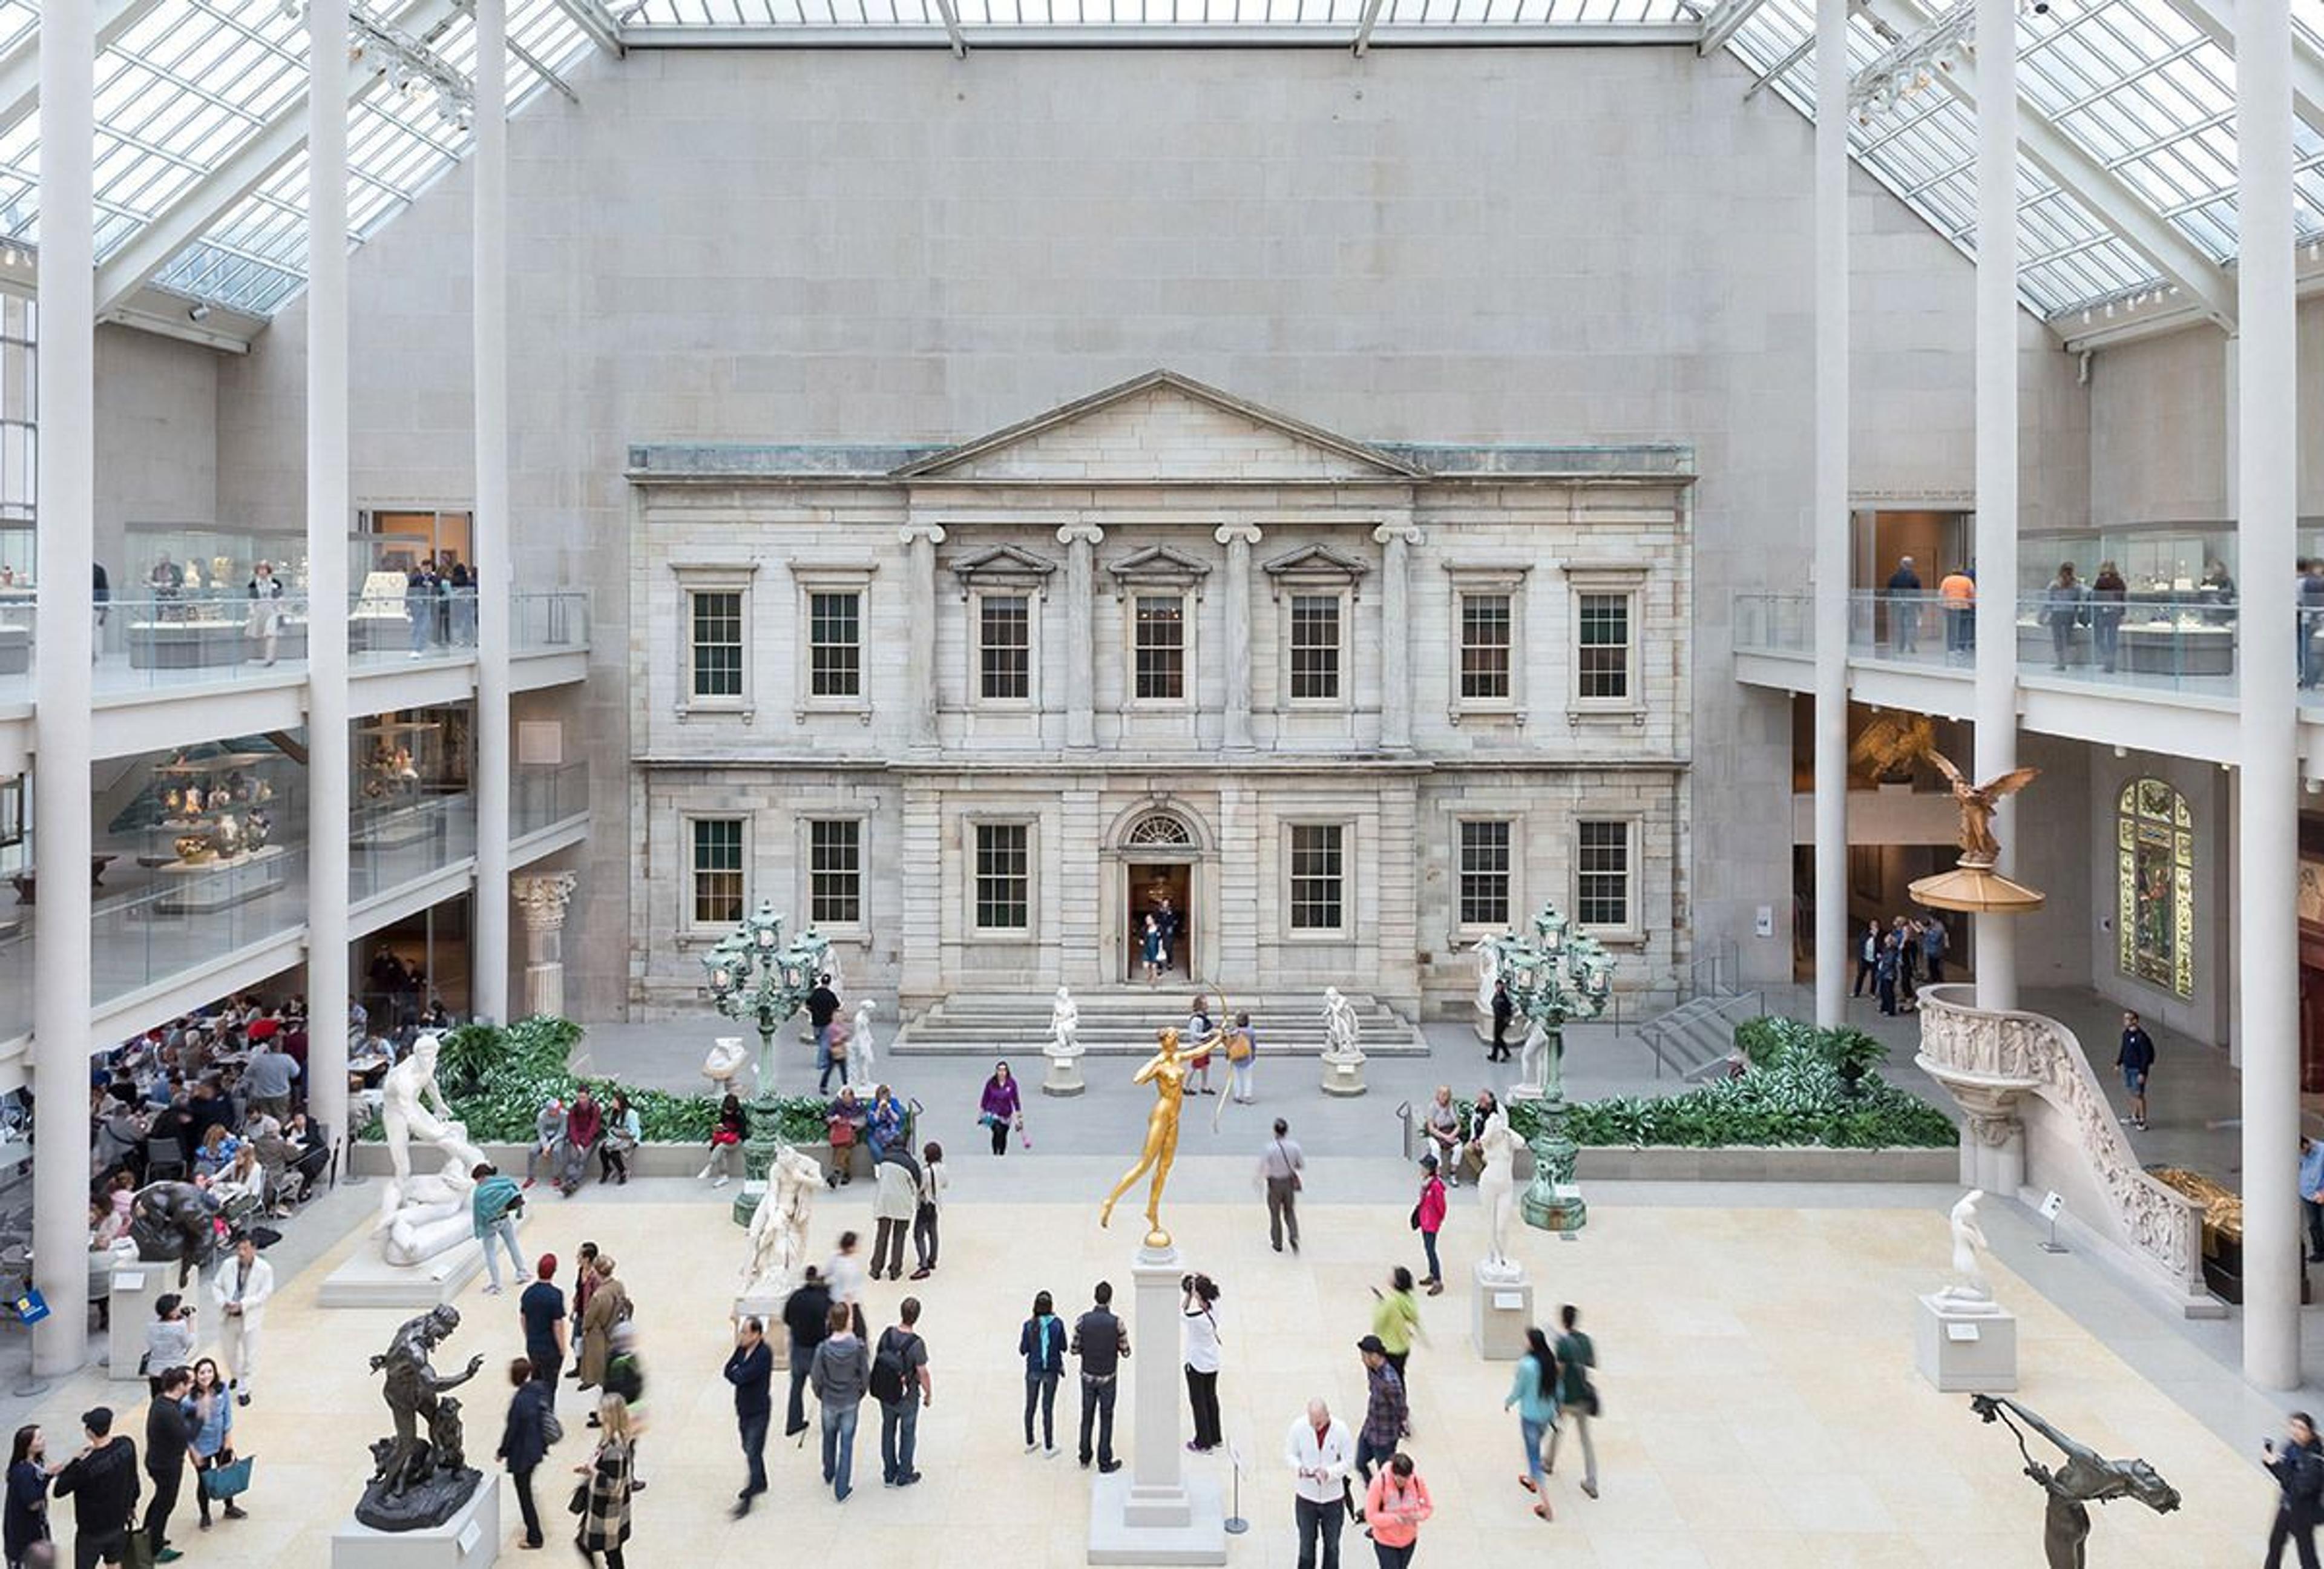 Visitors walking around an indoor courtyard with sculptures, a facade of a building is in the background.